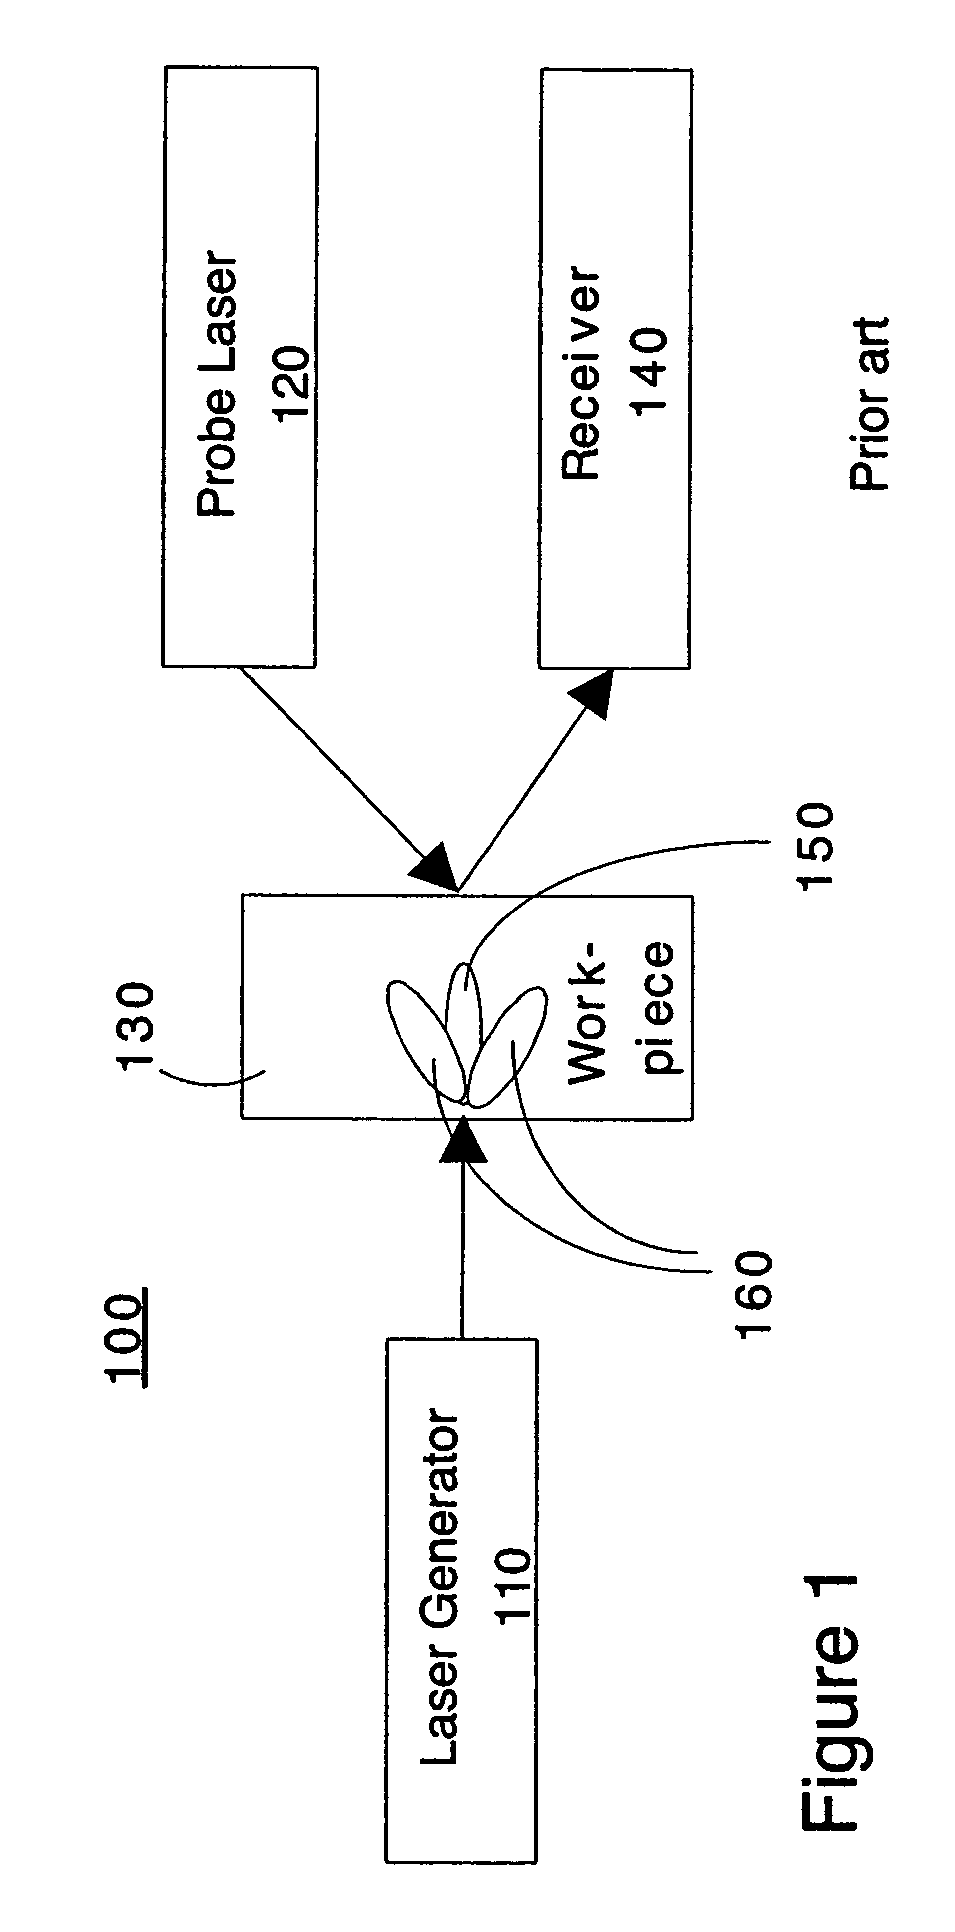 Ultrasound single-element non-contacting inspection system